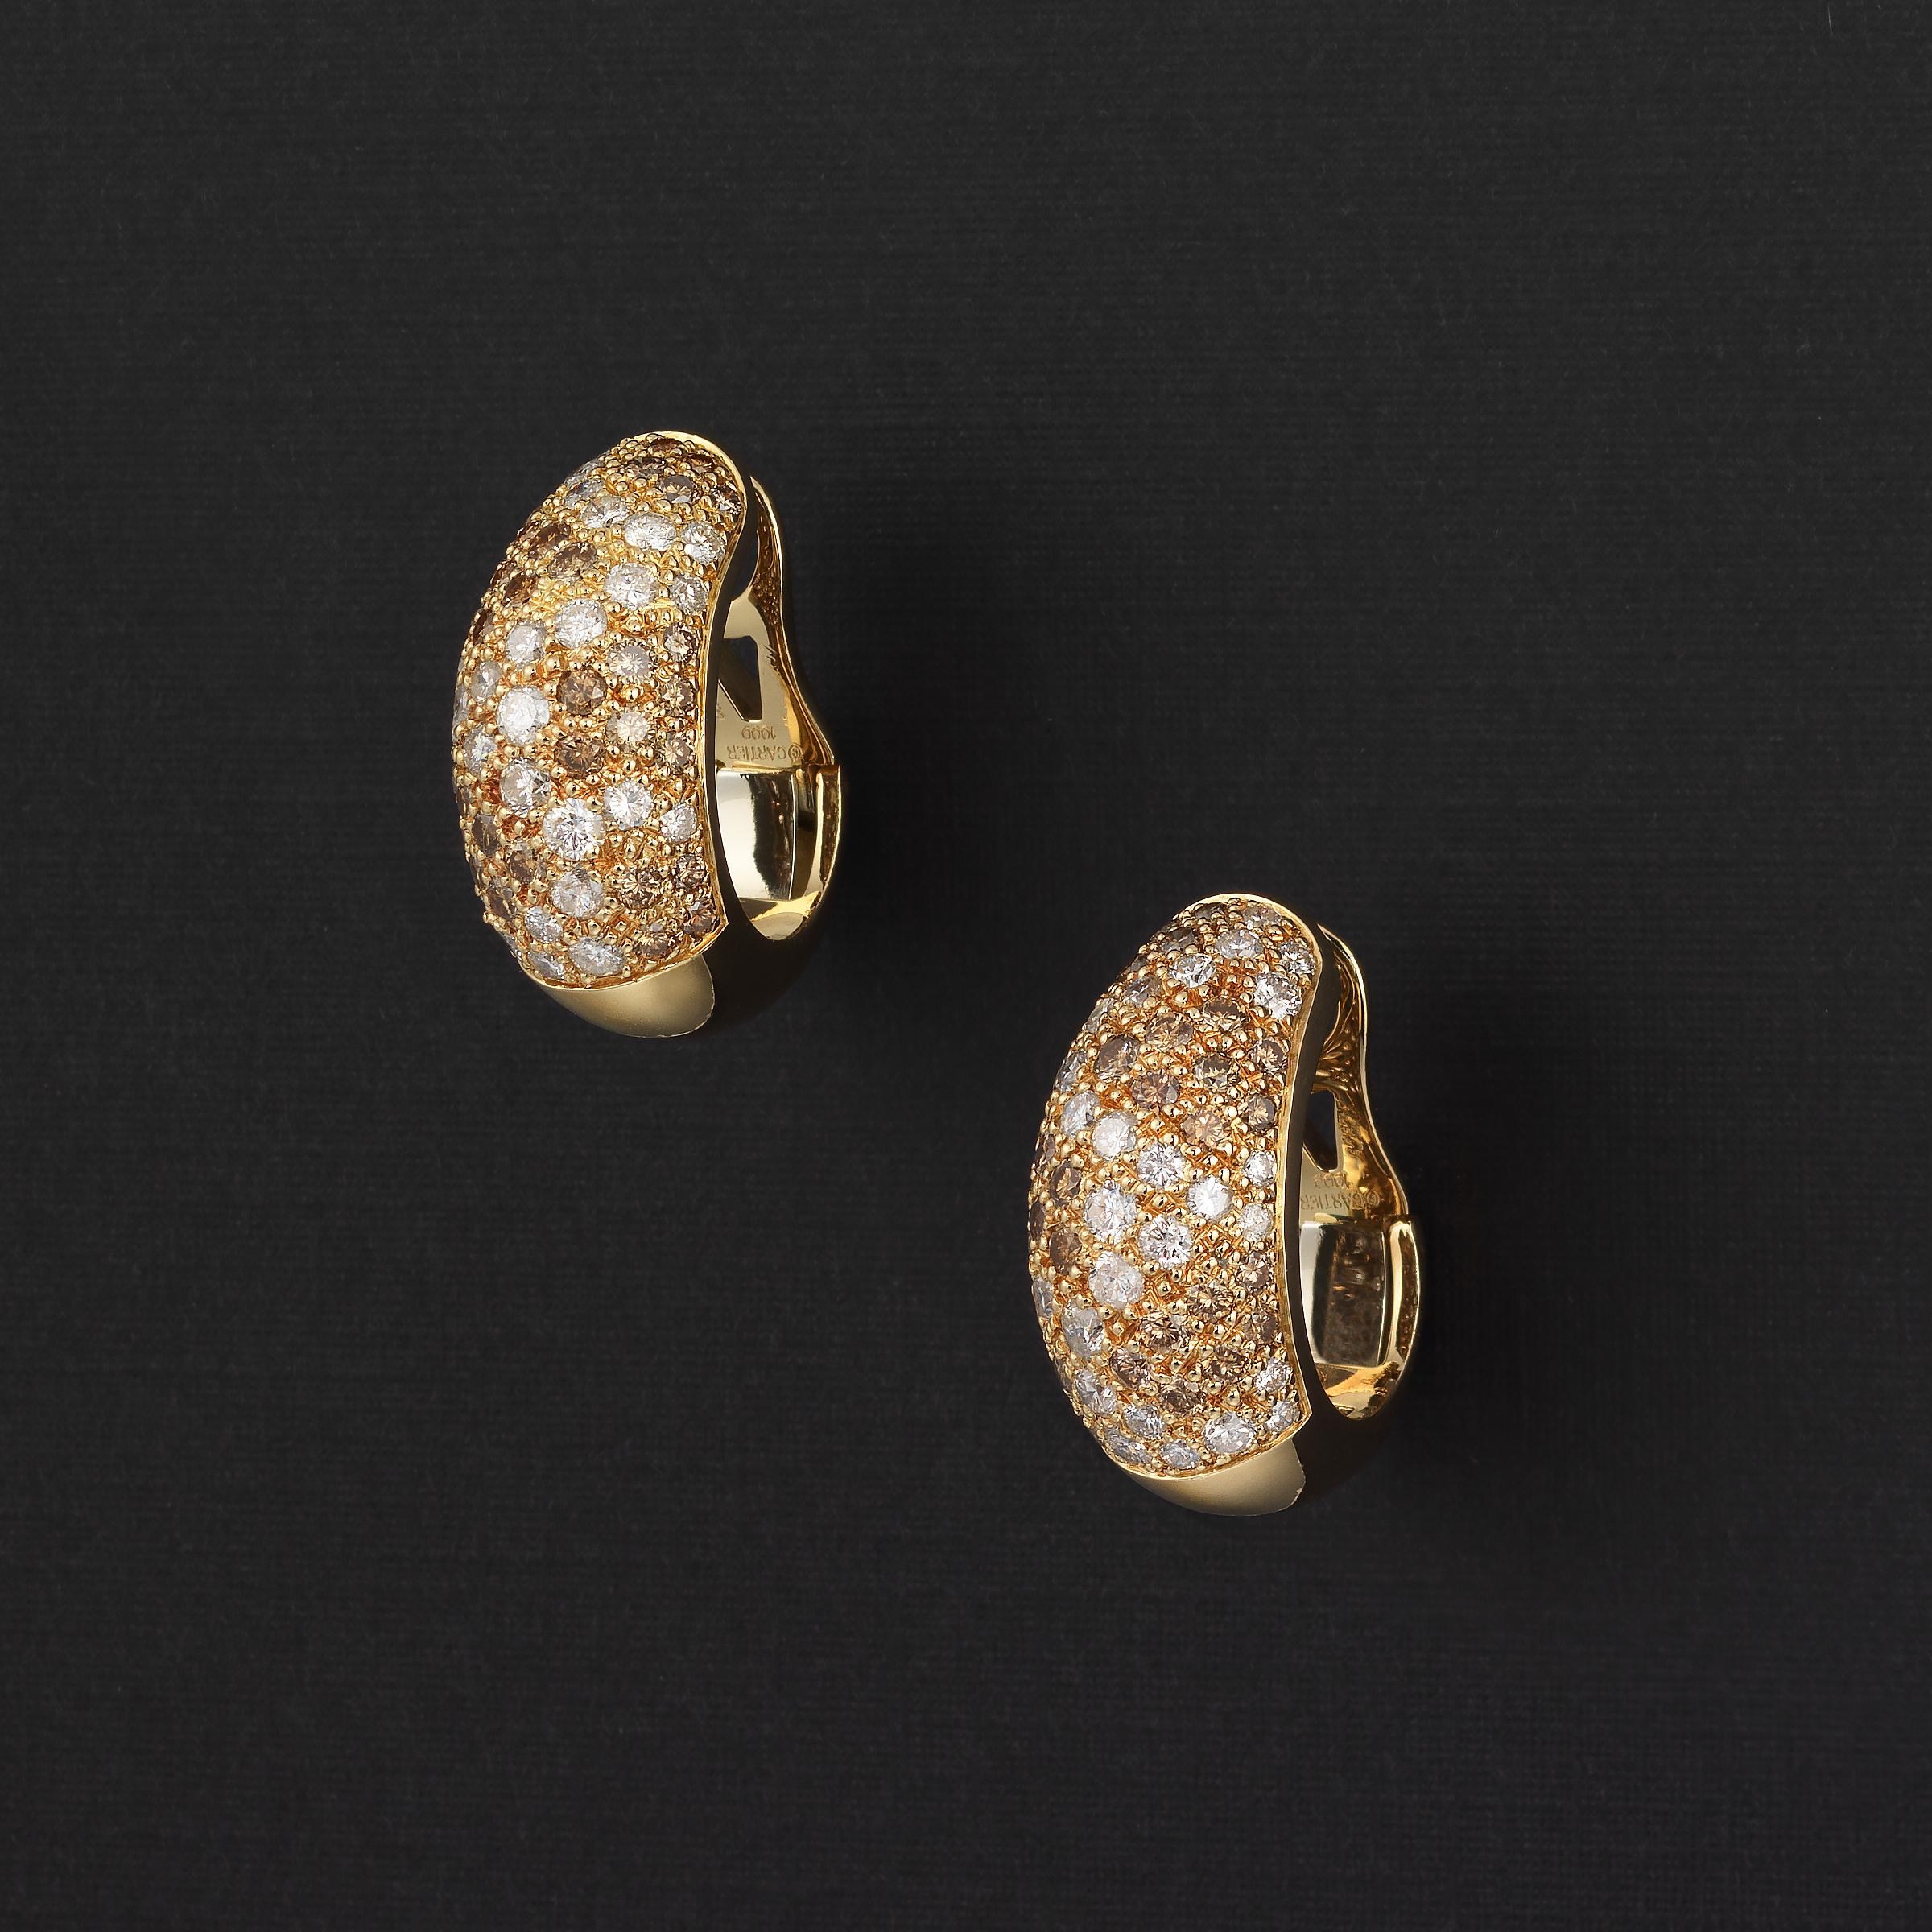 A glittering vintage pair of Cartier bombe earrings showcasing approximately 4 carats of white and cognac - brown colored diamonds, all pave-set in 18 karat yellow gold. The earrings are masterfully crafted by Cartier and their gently curving bombe